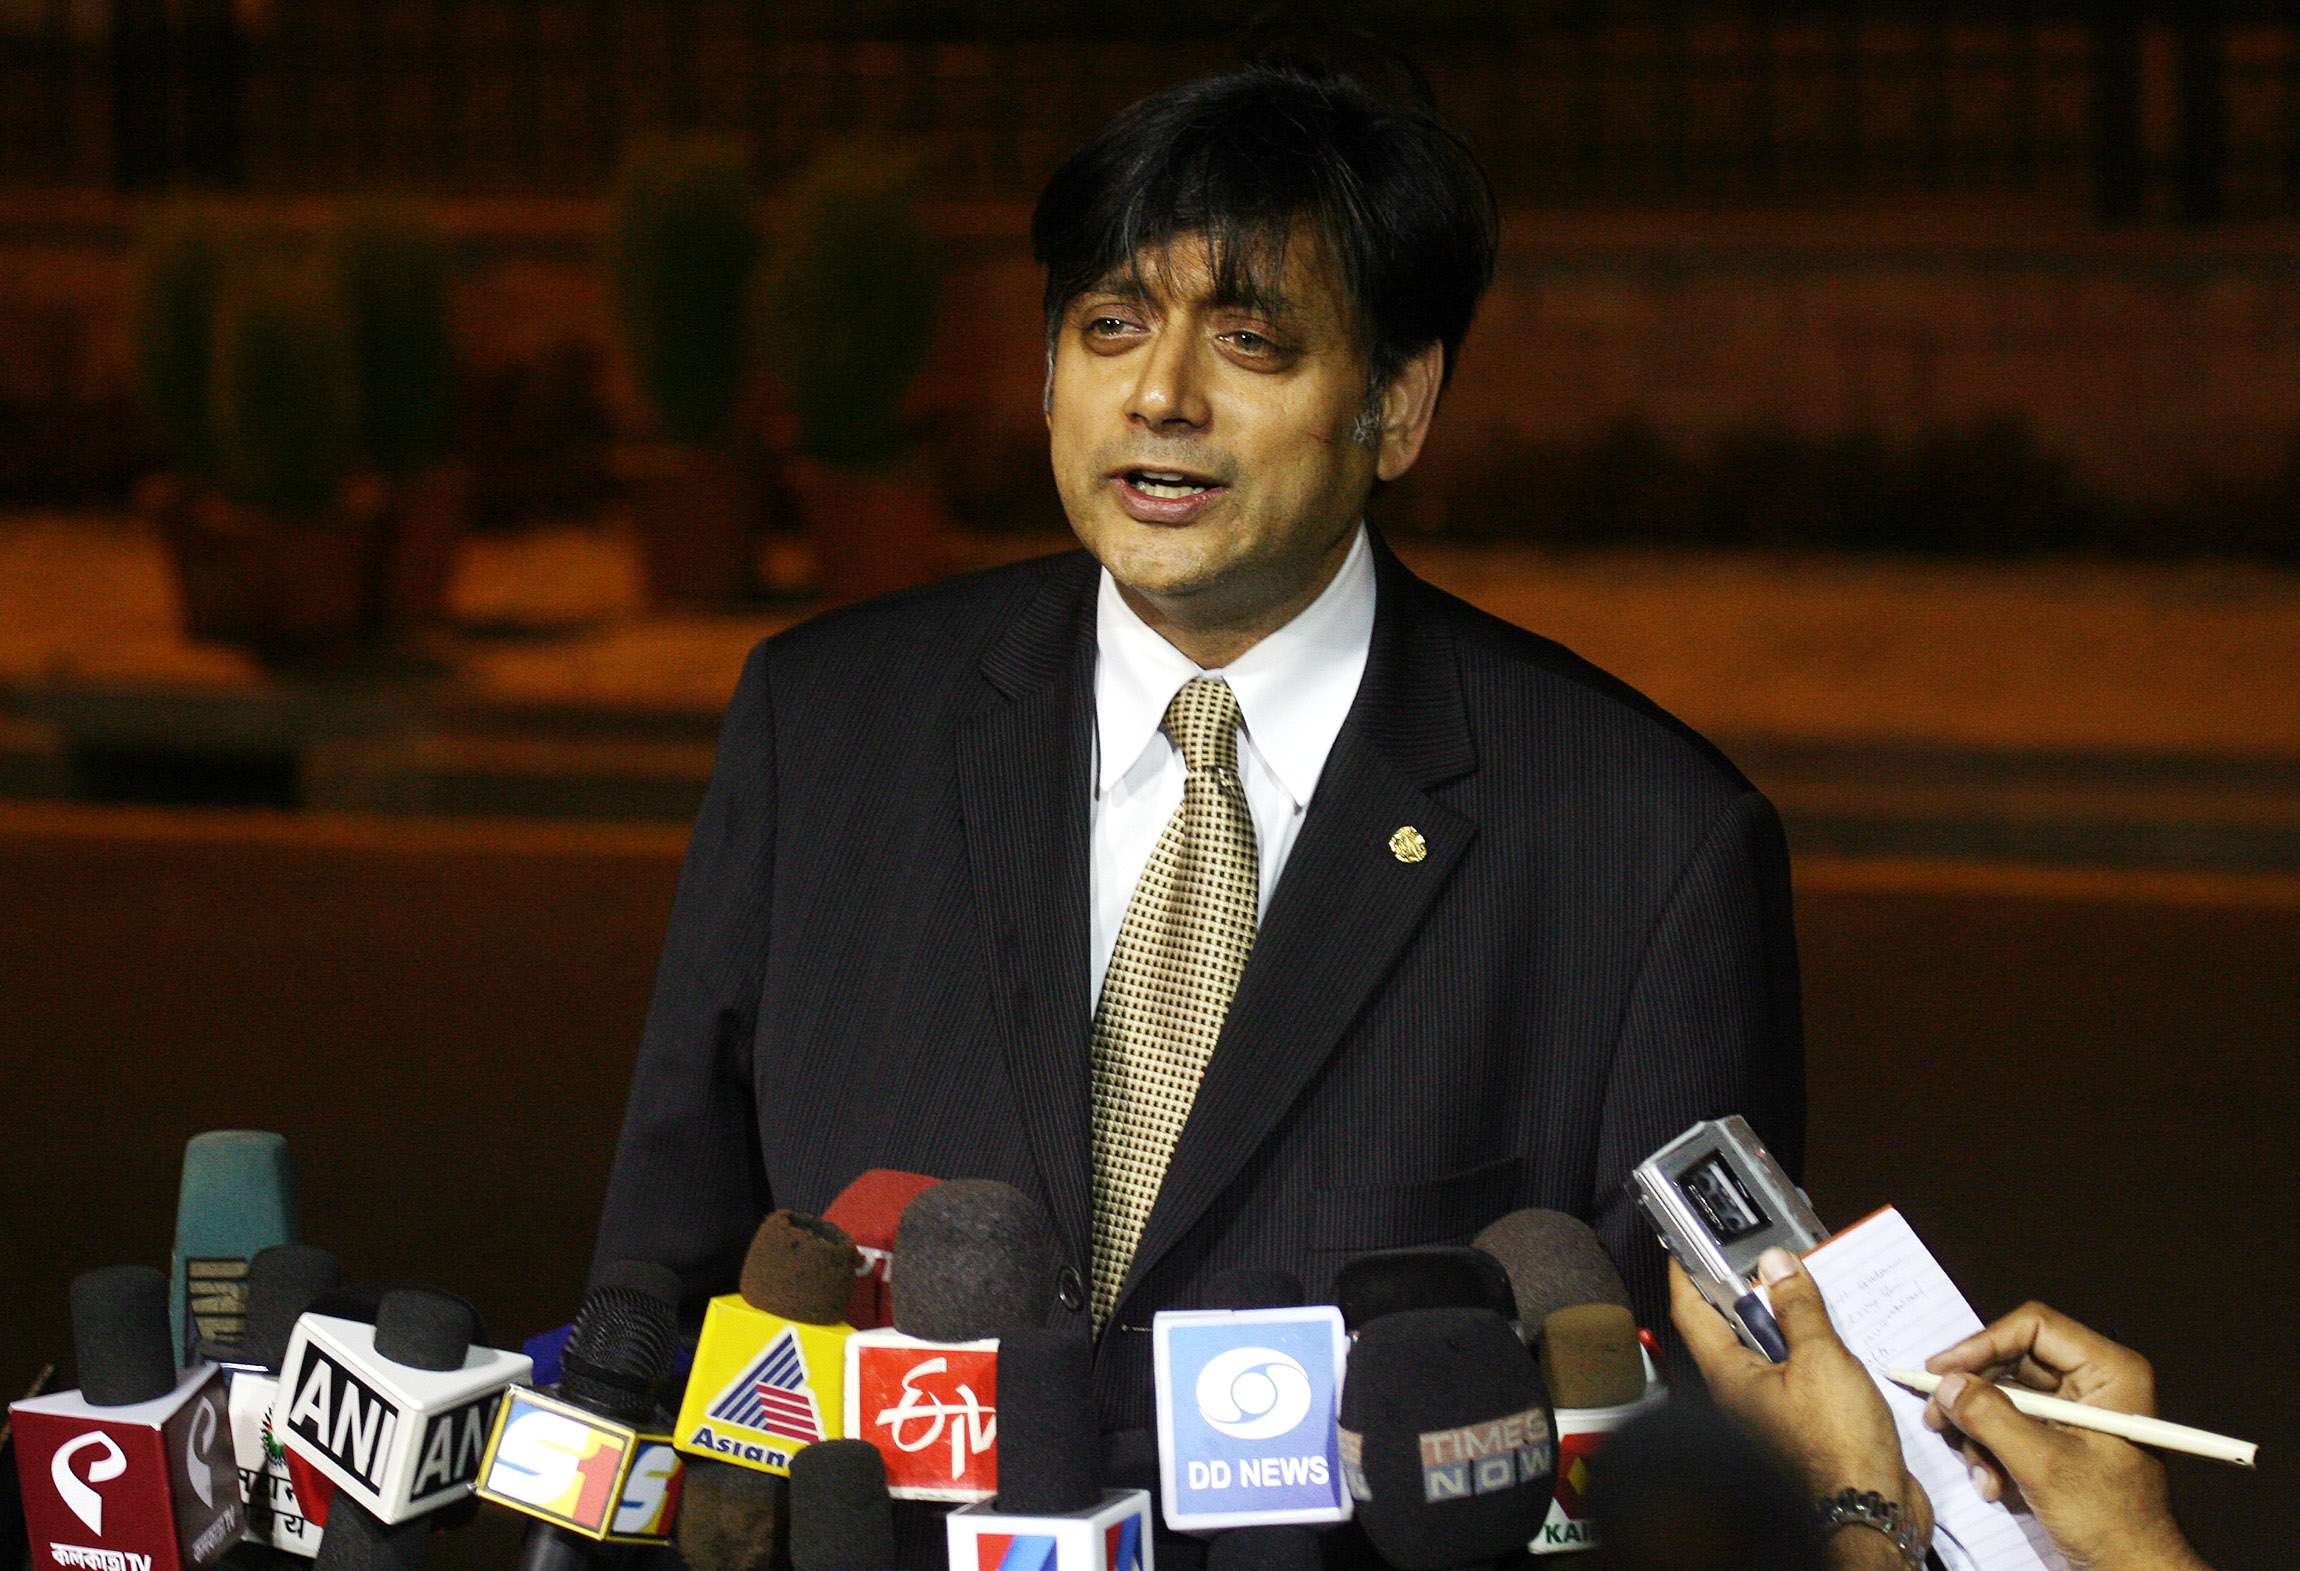 Shashi Tharoor addresses the media as India’s nomination for UN Secretary-General after meeting Prime Minister Manmohan Singh in New Delhi in June 2006. Photo: AFP